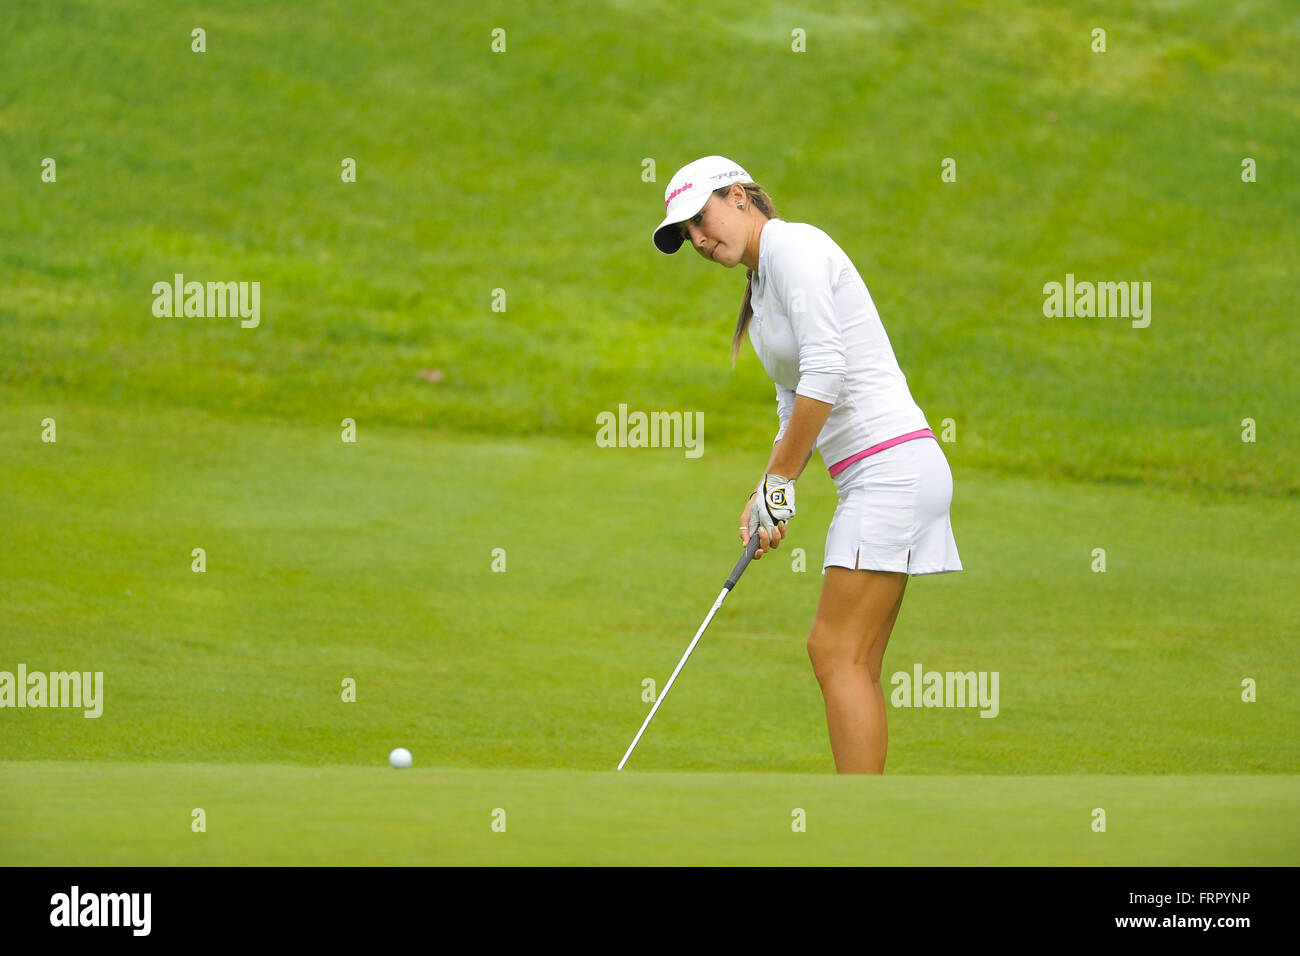 South Bend, IN, USA. 22nd June, 2013. Jaye Marie Green during the Four Winds Invitational at Blackthorn Golf Club in South Bend, Indiana on June 22, 2013.ZUMA Press/Scott A. Miller © Scott A. Miller/ZUMA Wire/Alamy Live News Stock Photo